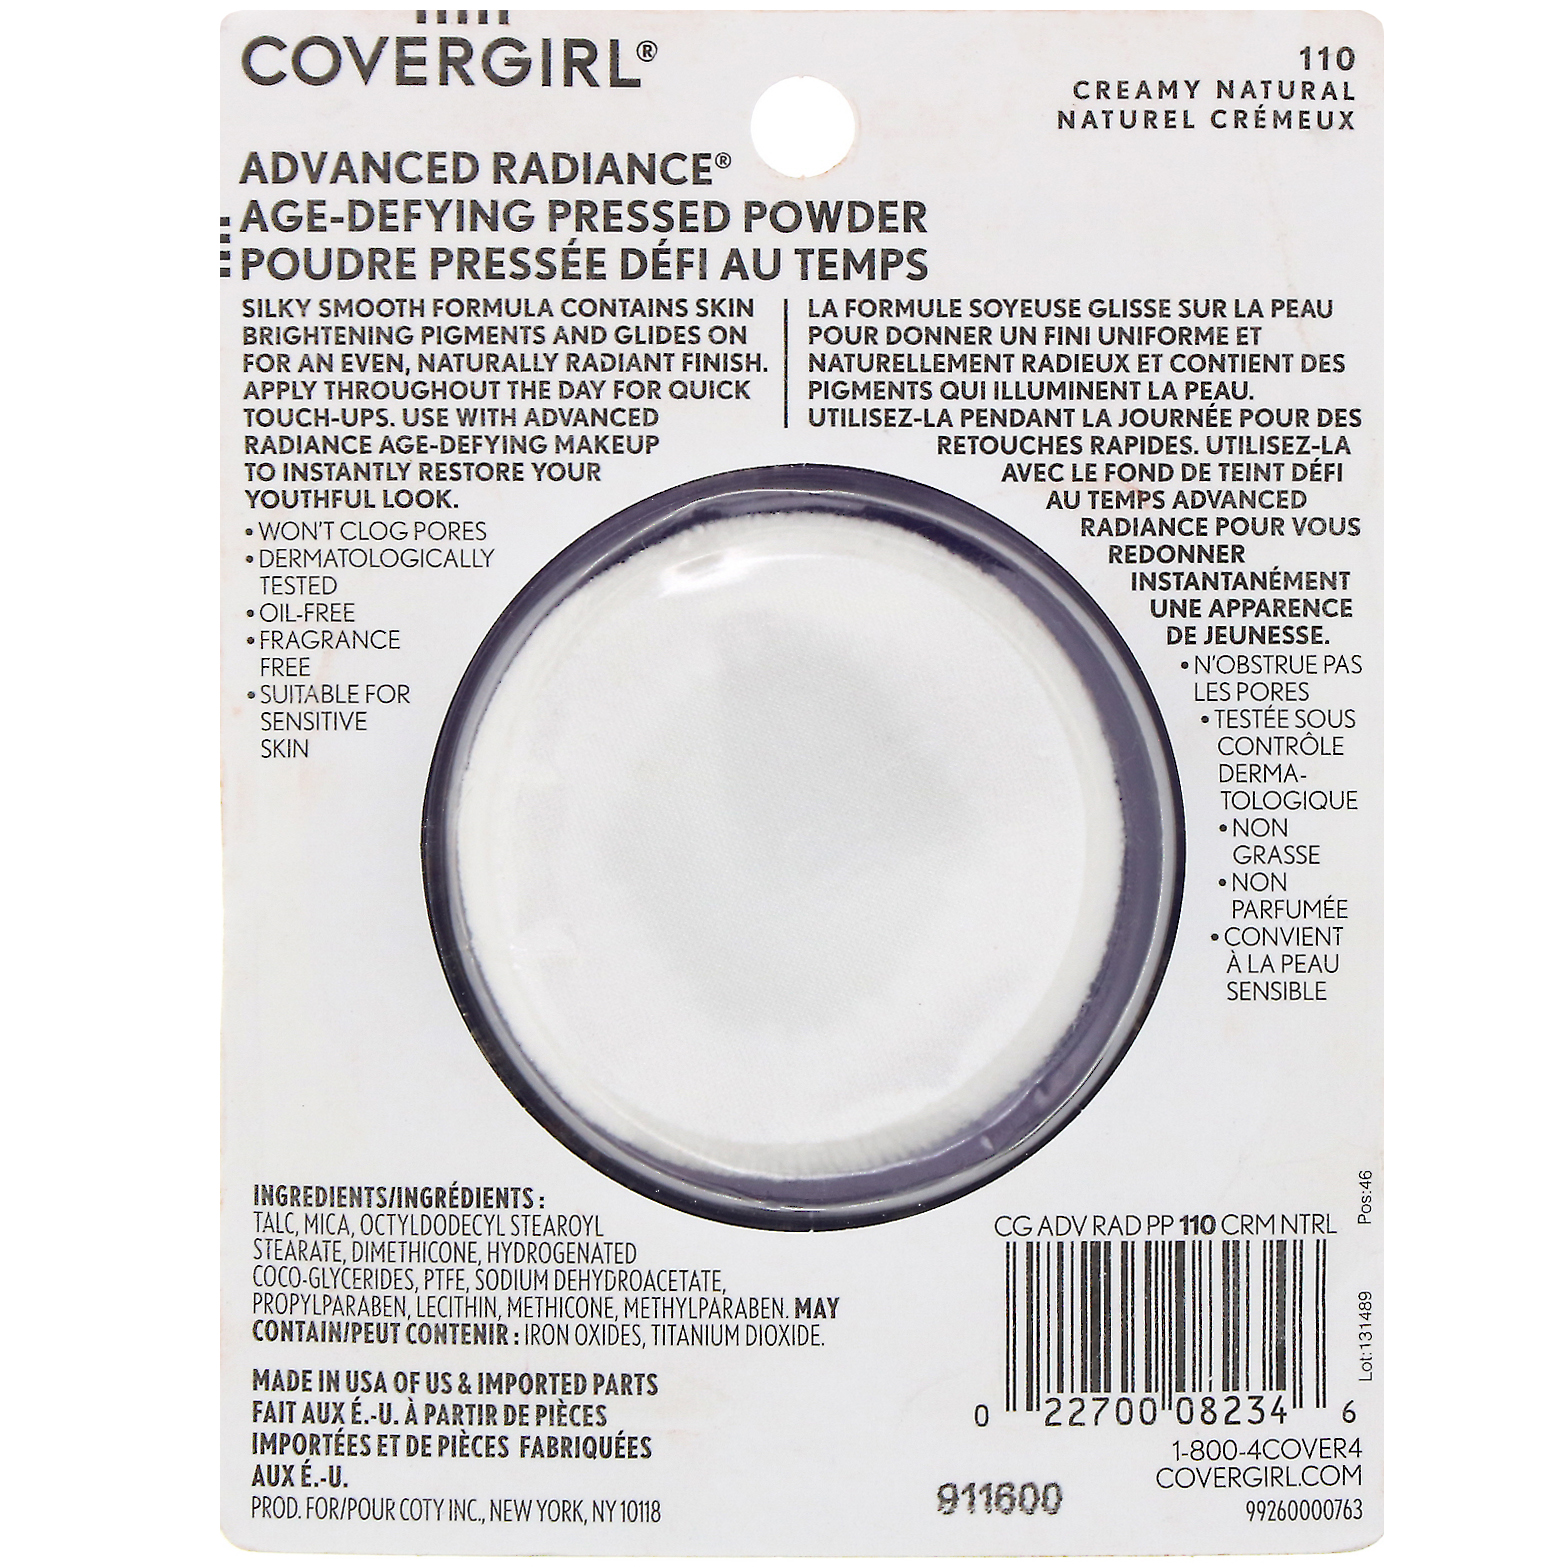 COVERGIRL Advanced Radiance Age-Defying Pressed Powder Pack of 1